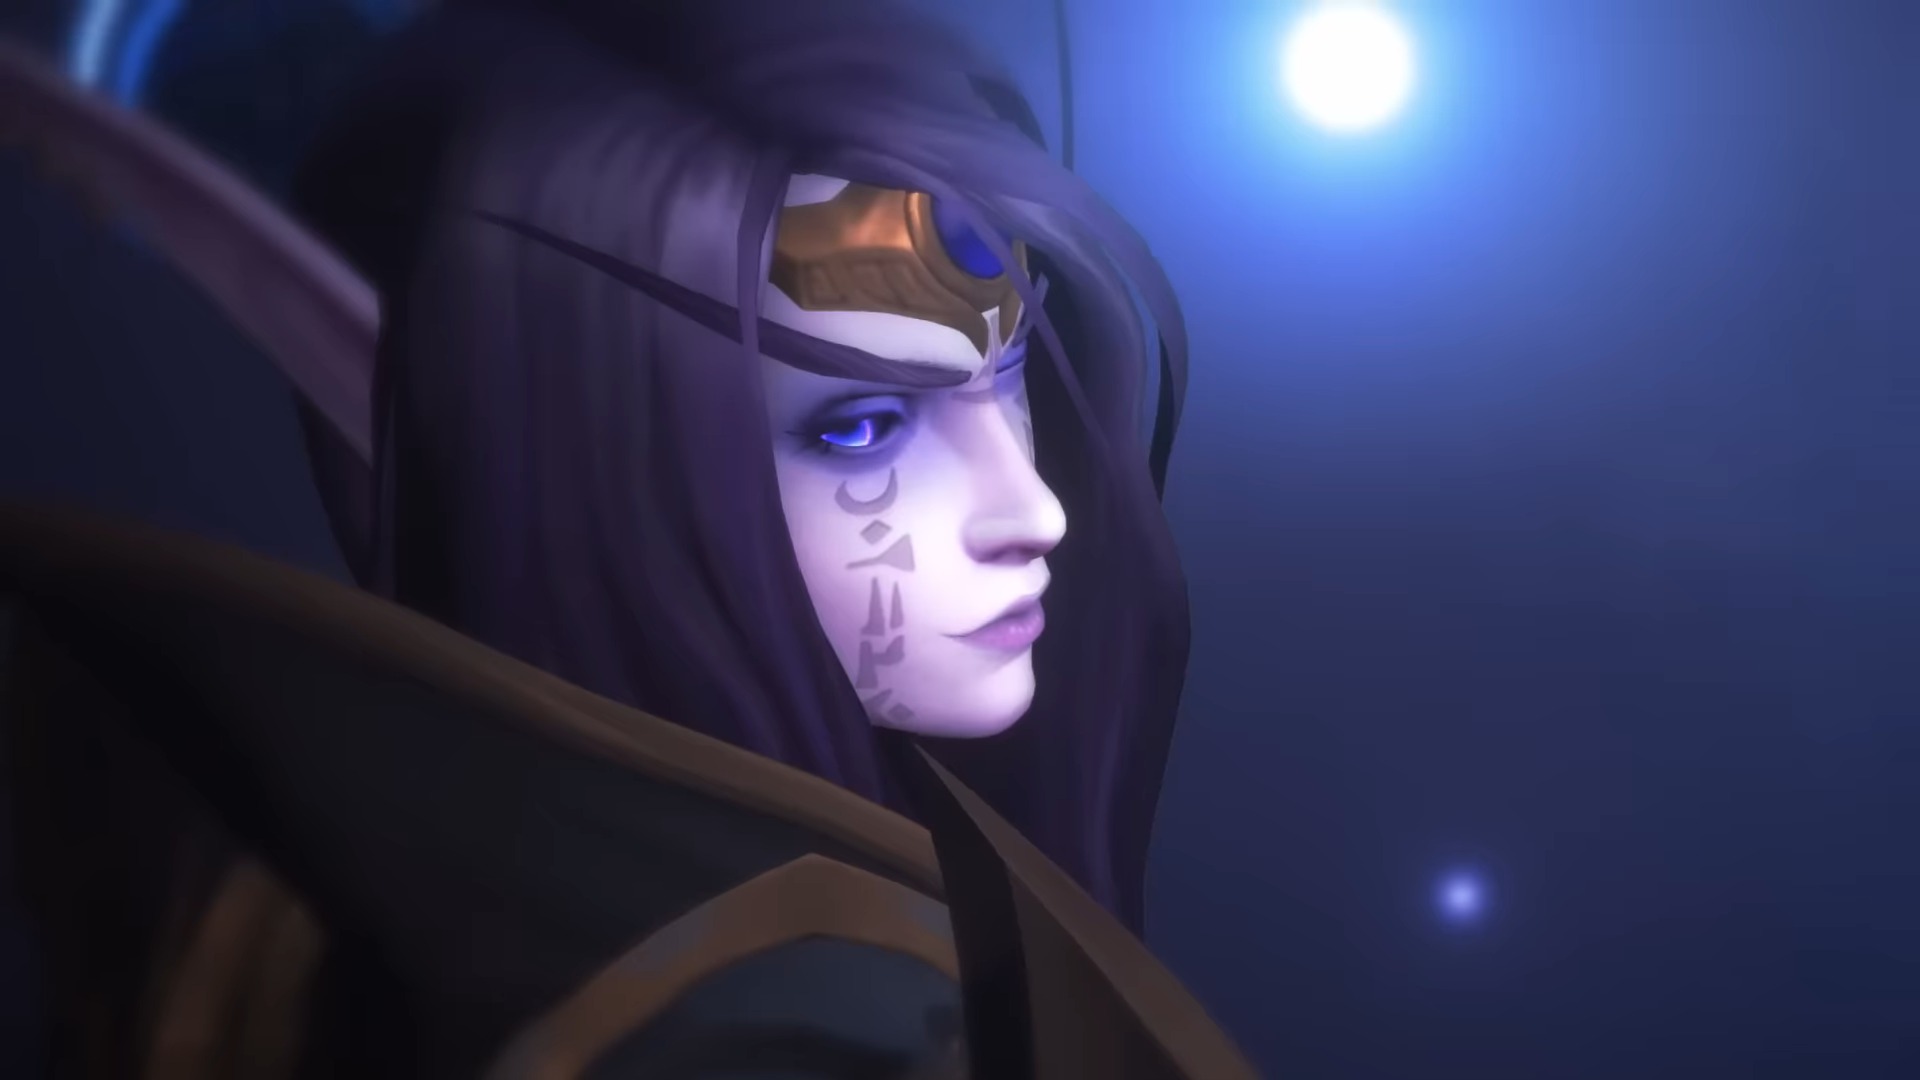 World of Warcraft: The War Within pre-patch event trailer screenshot